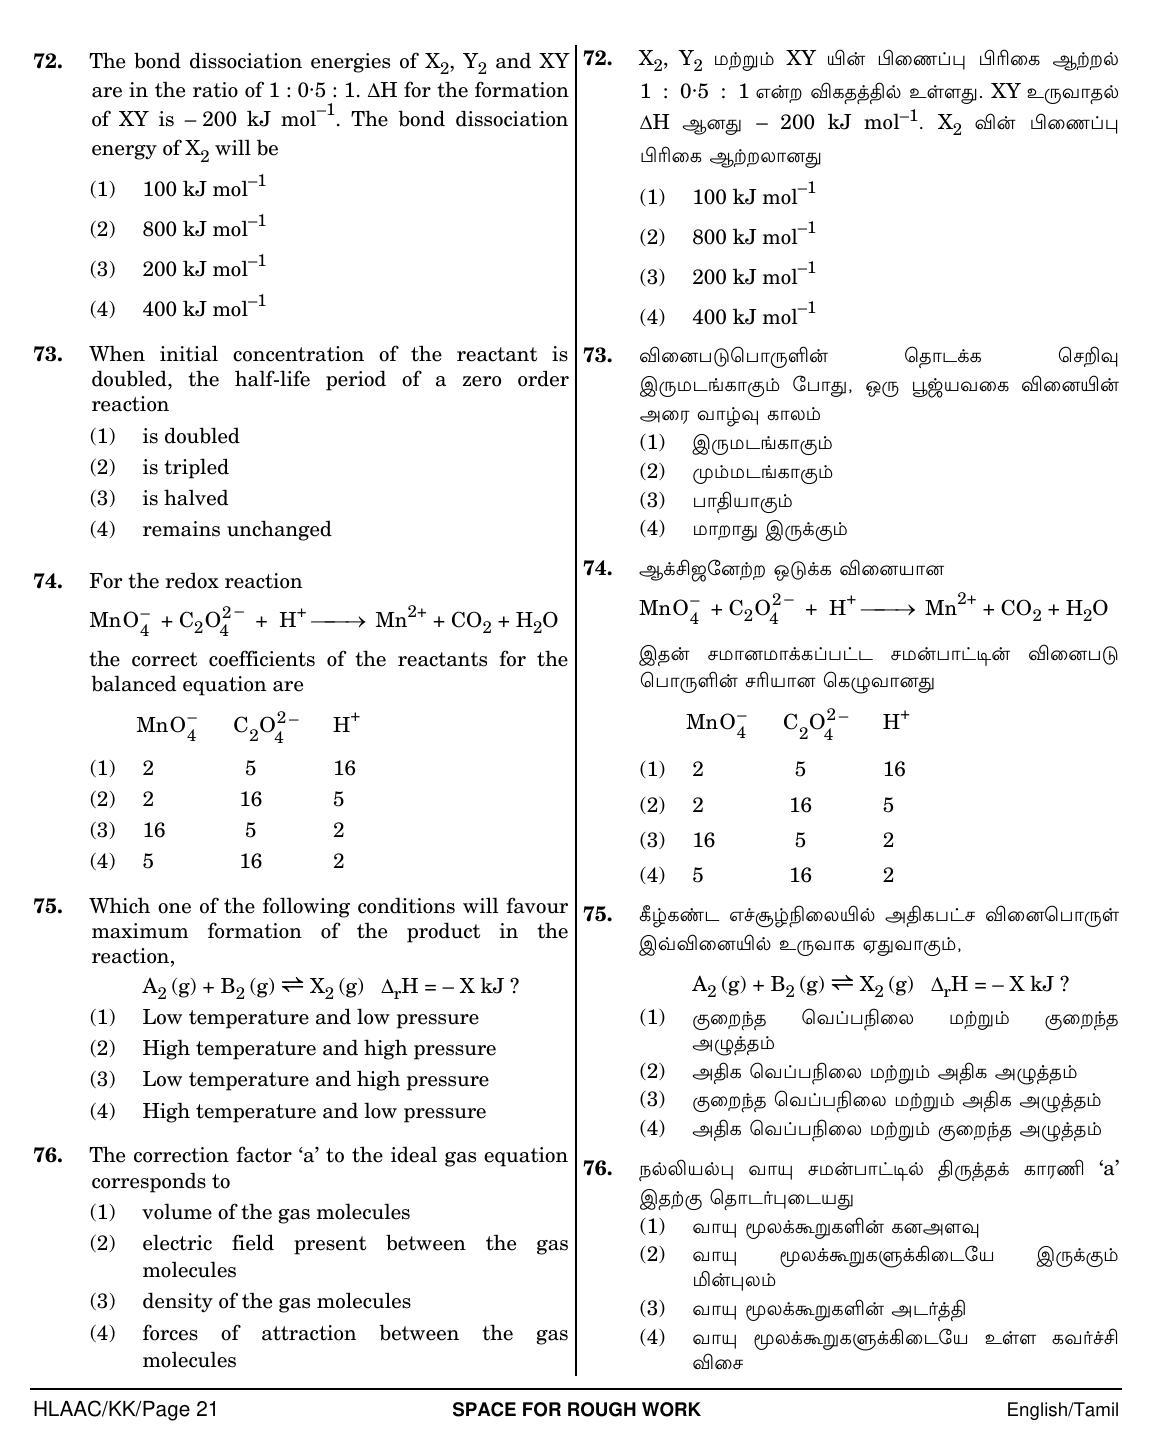 NEET Tamil KK 2018 Question Paper - Page 21